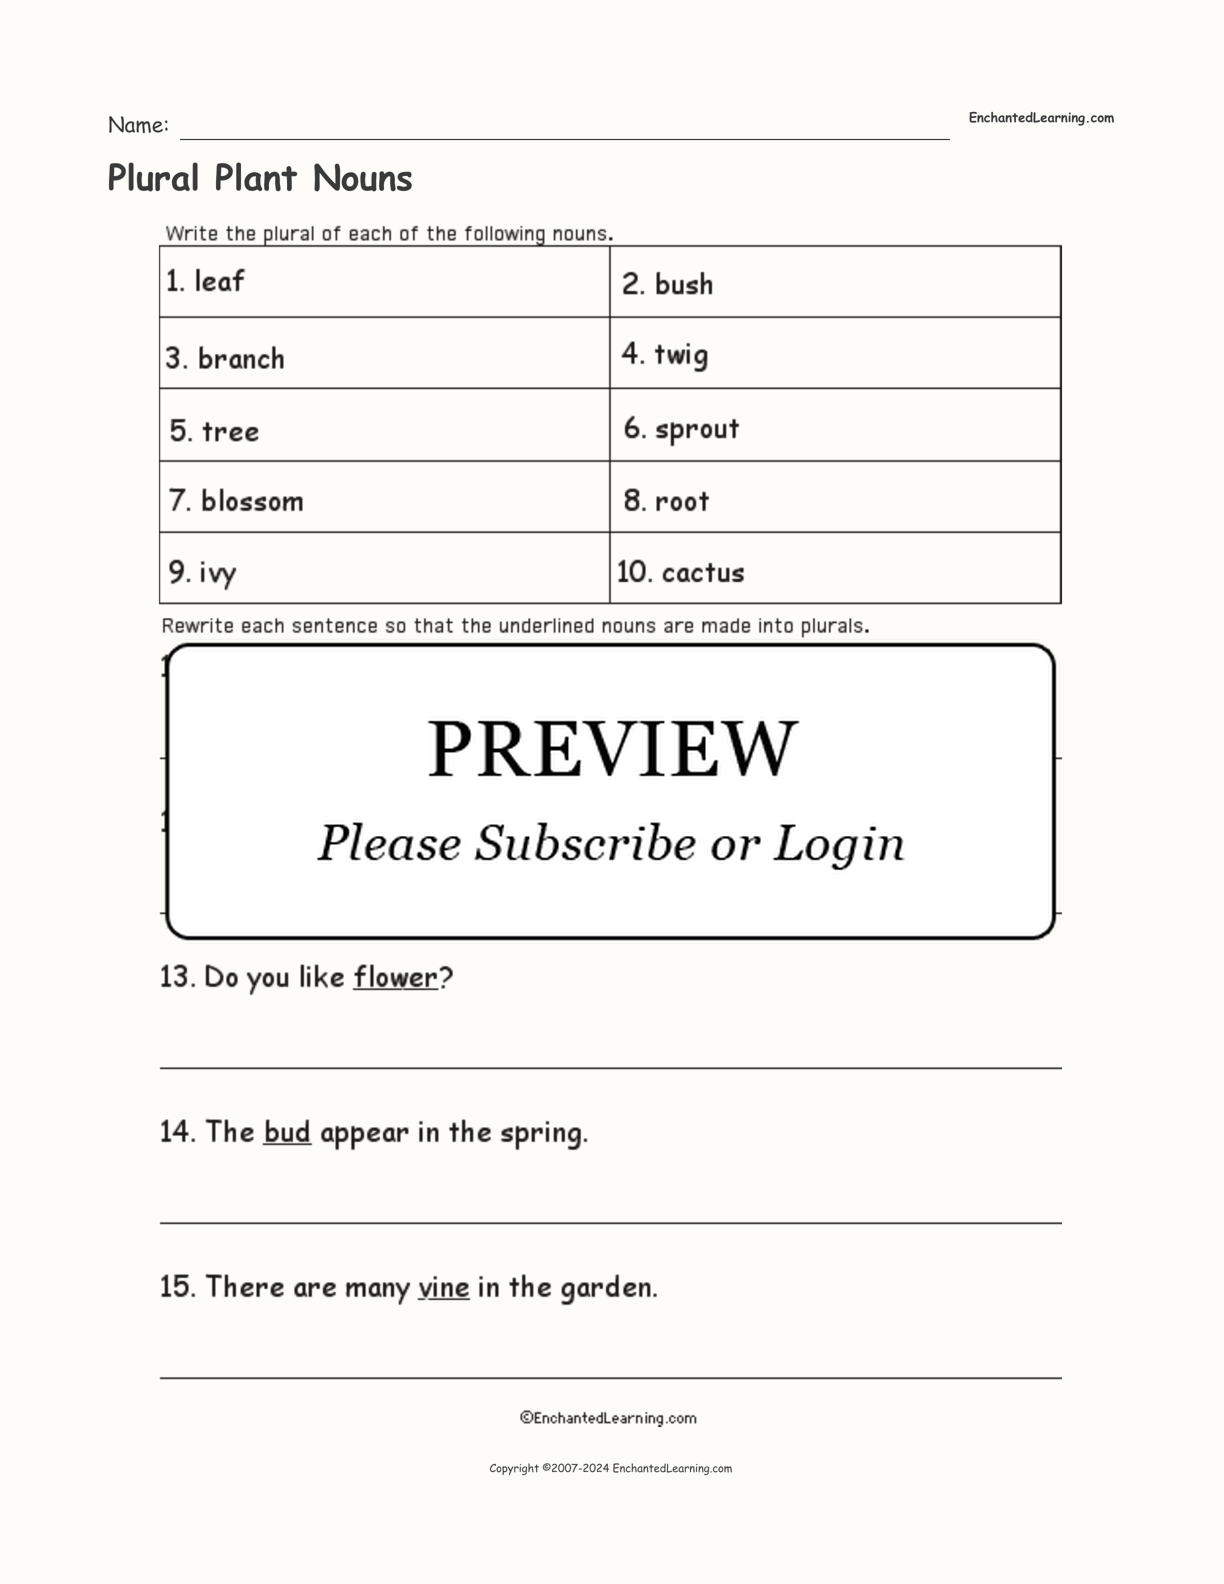 Plural Plant Nouns interactive worksheet page 1